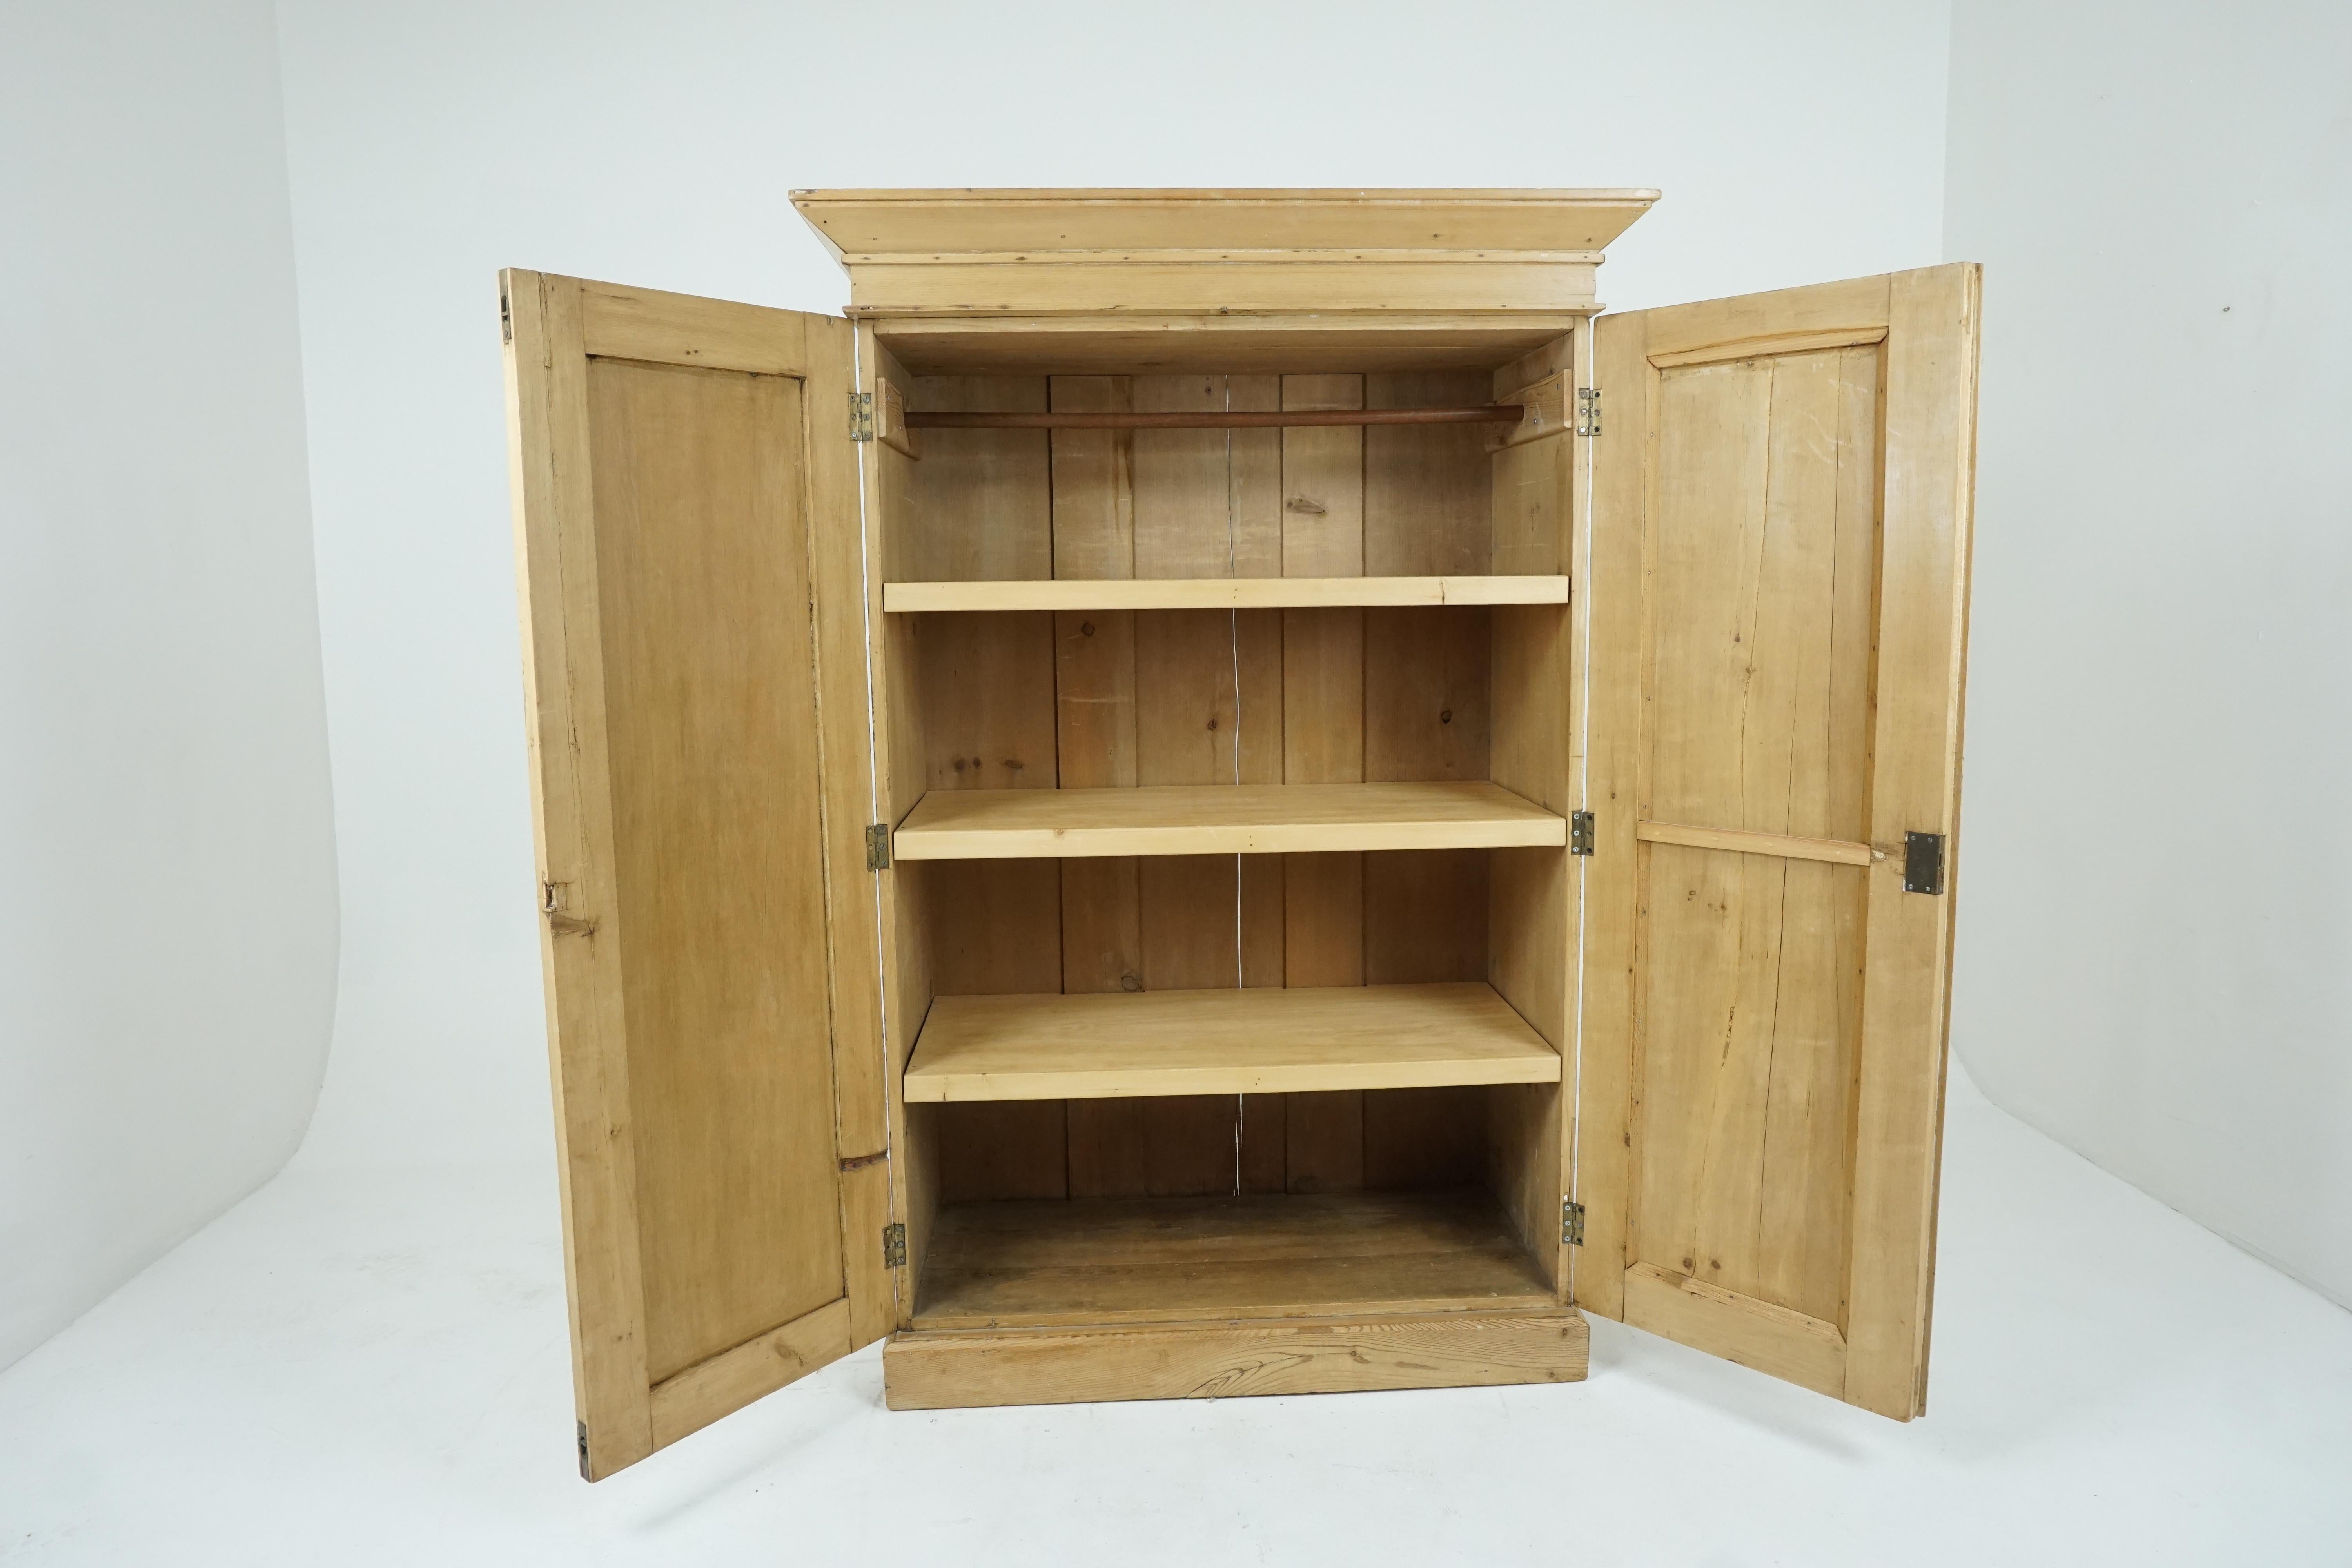 Antique pine cupboard, stripped pine 2 door armoire or pantry, antique furniture, Scotland 1880, B1956

Scotland 1880
Solid pine
Wax finish
Moulded cornice above
Pair of full length paneled doors with porcelain handle
Three fixed shelves on